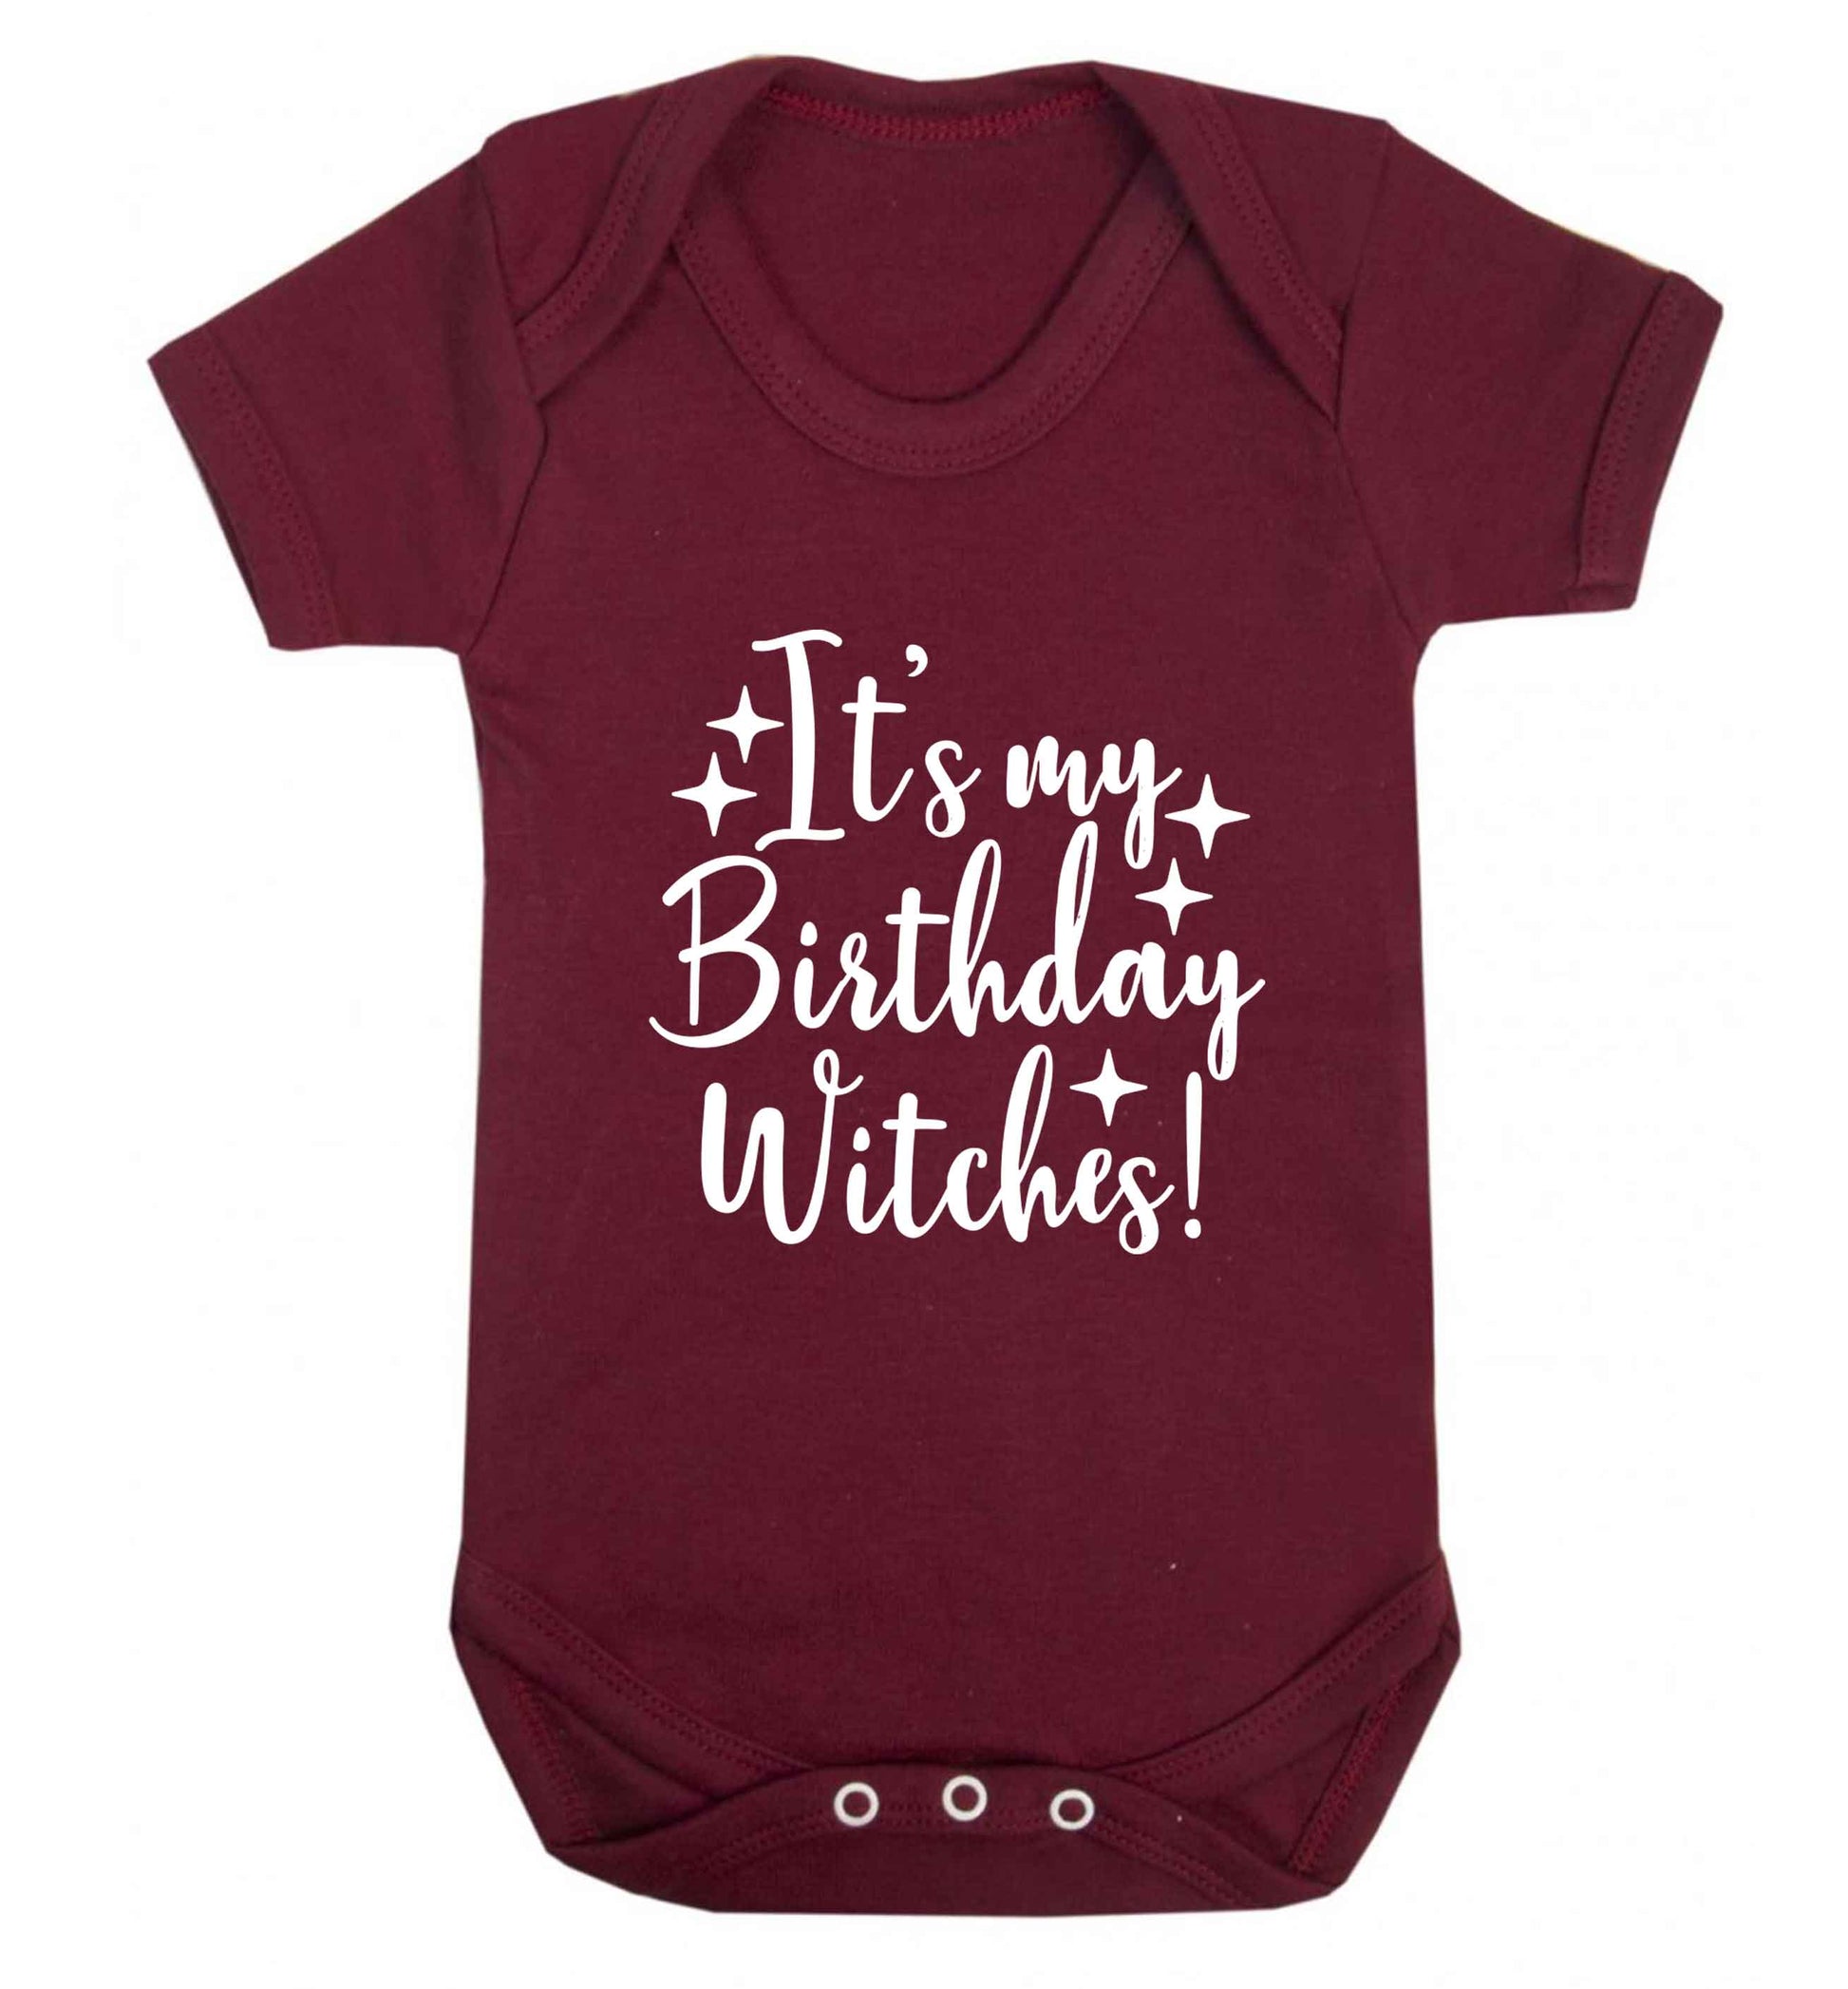 It's my birthday witches!baby vest maroon 18-24 months